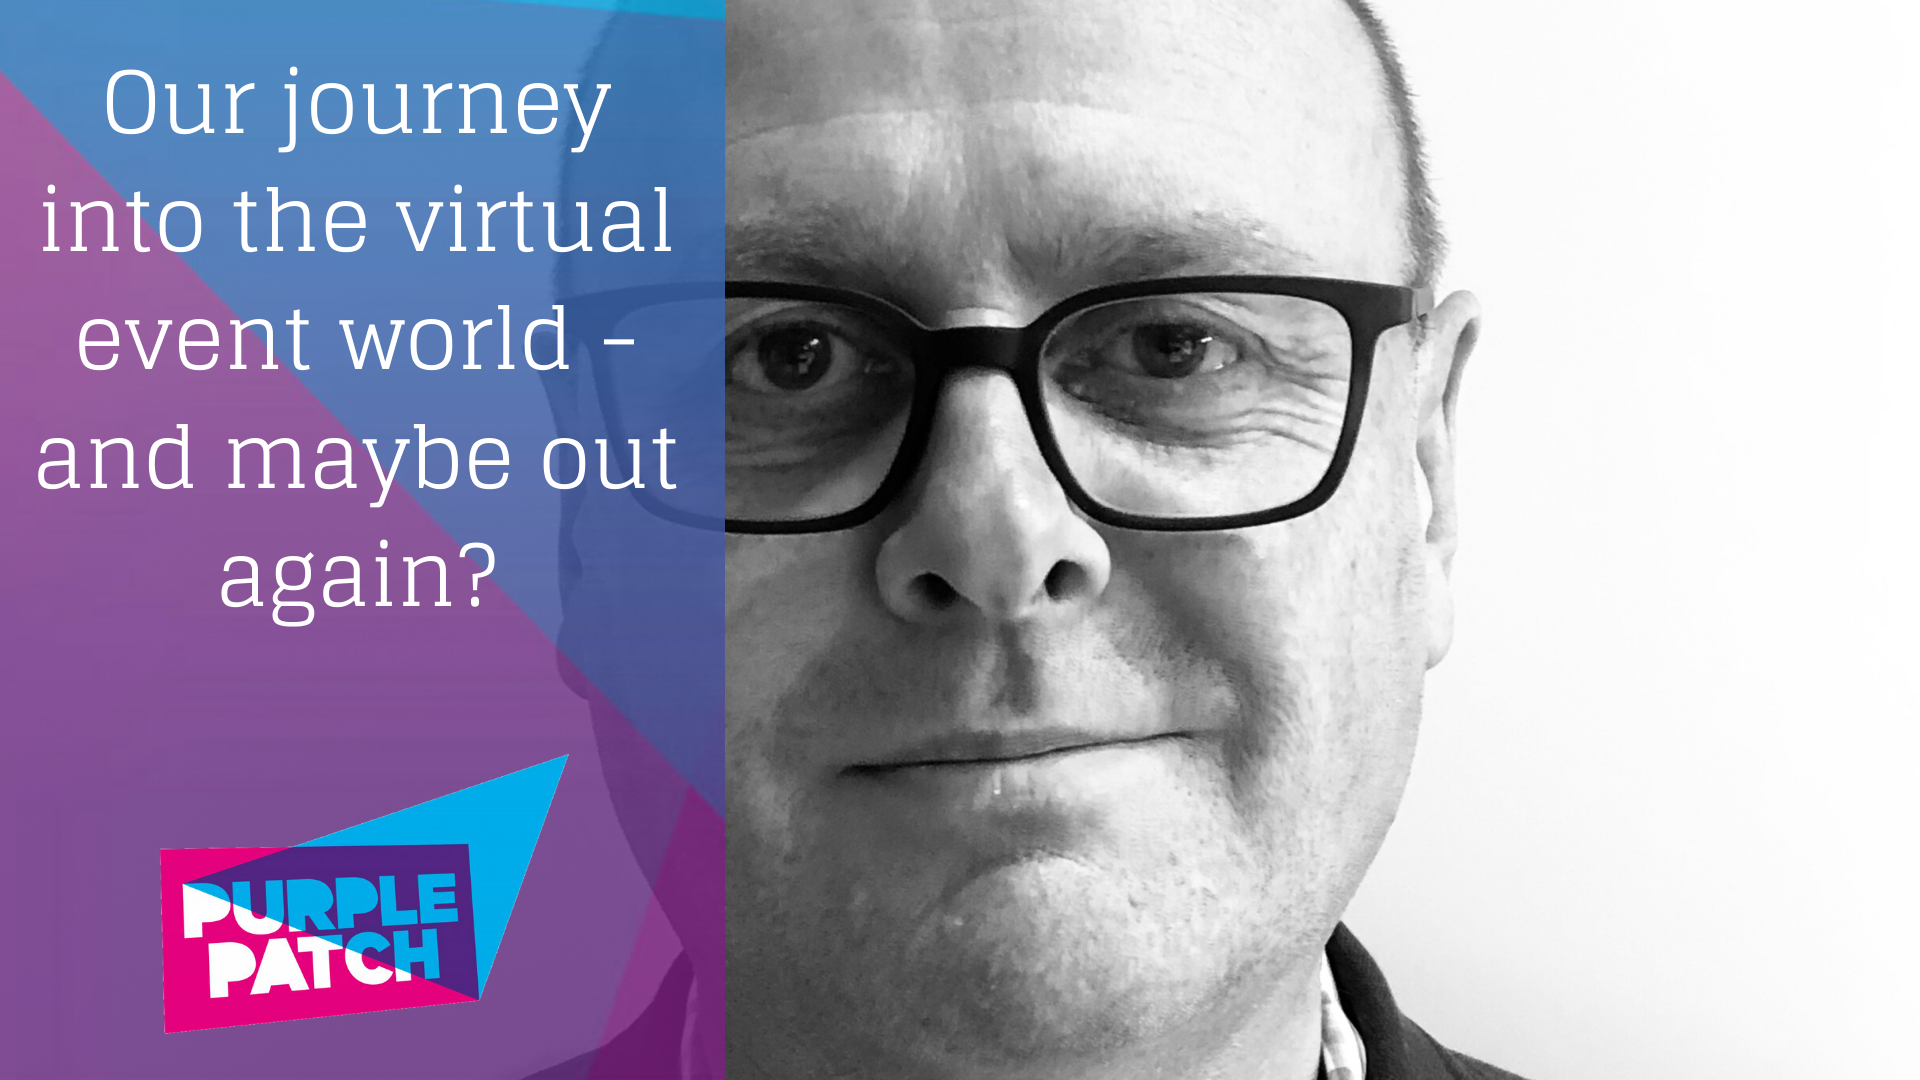 Our journey into the virtual event world – and maybe out again?